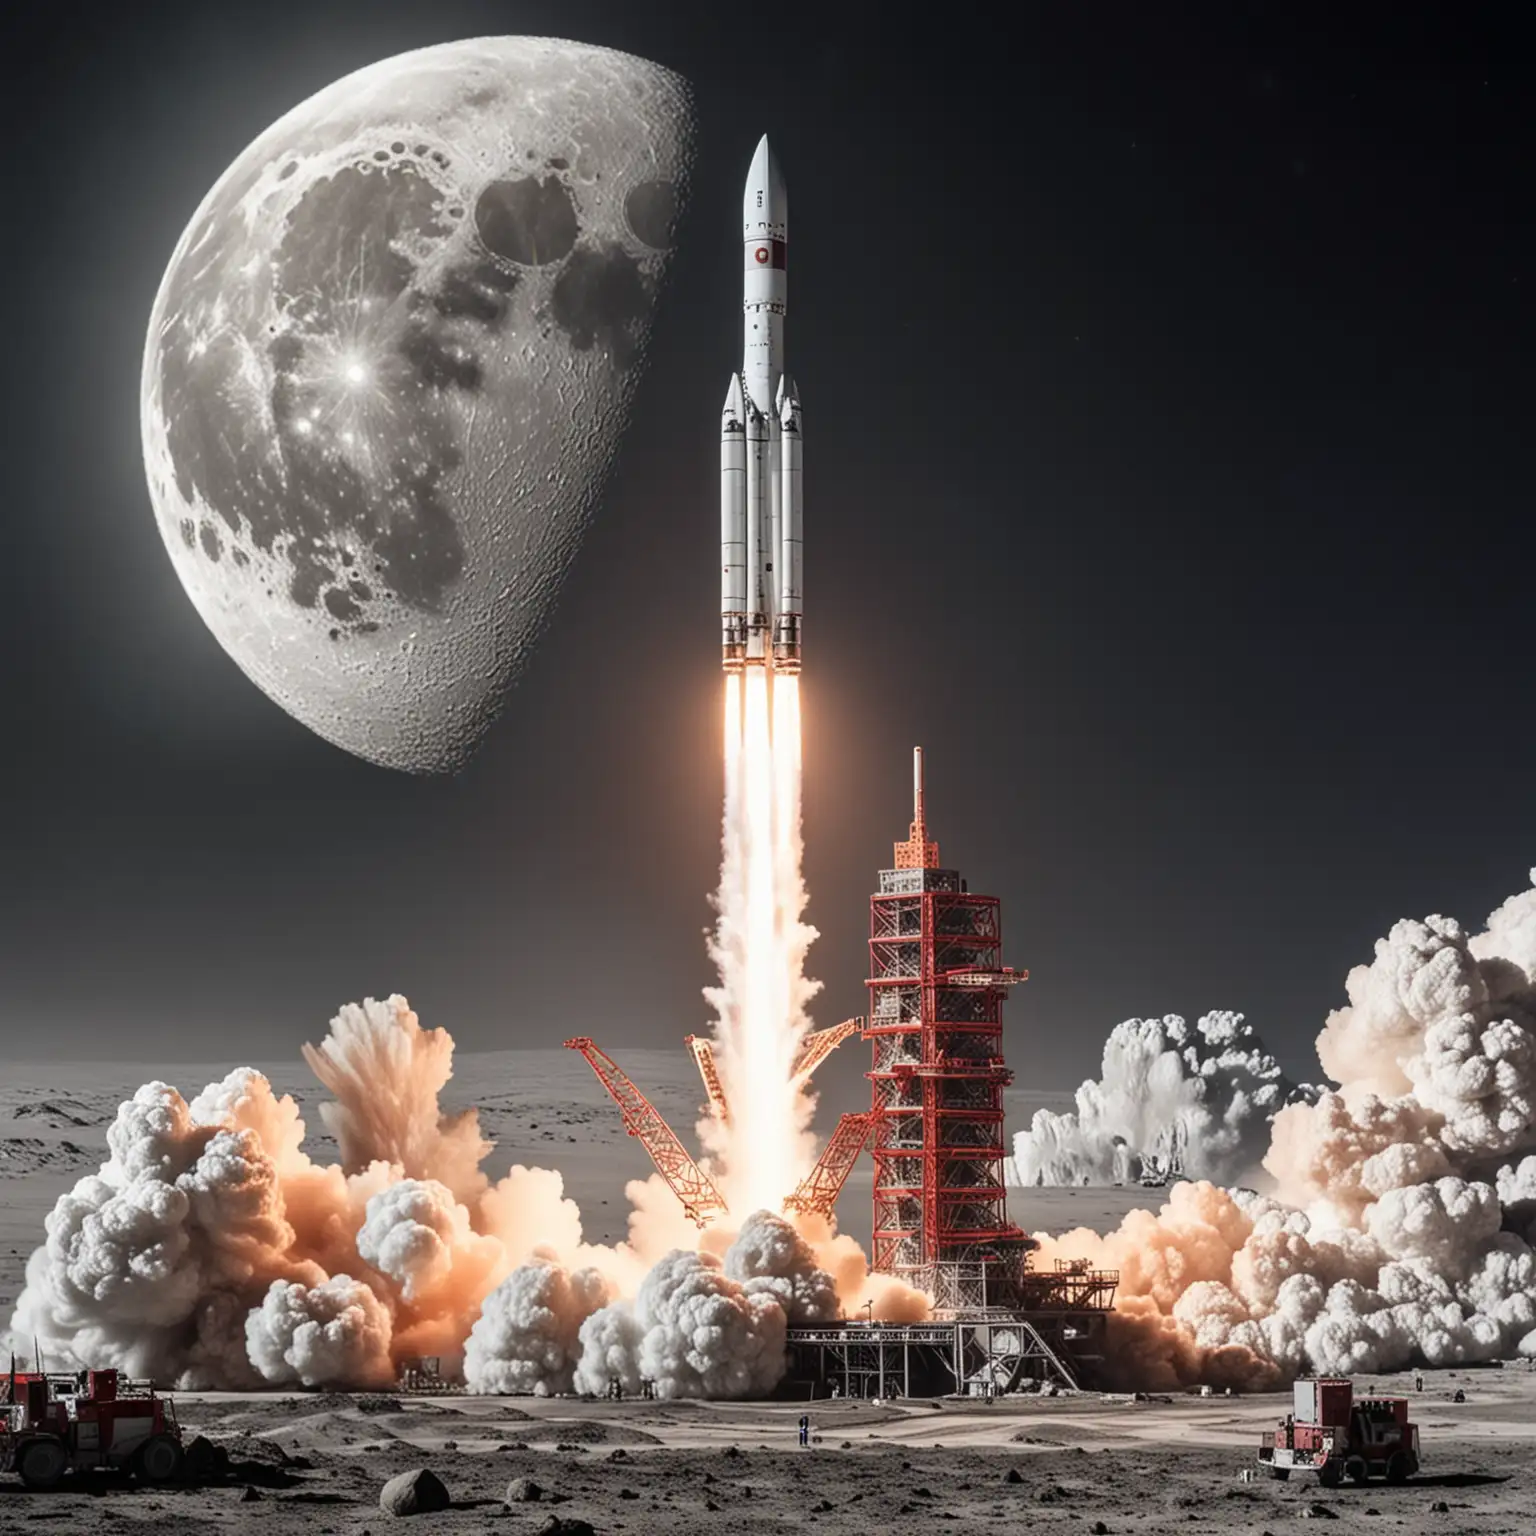 A mega gigantic chinese rocket white and red, in space in the moon